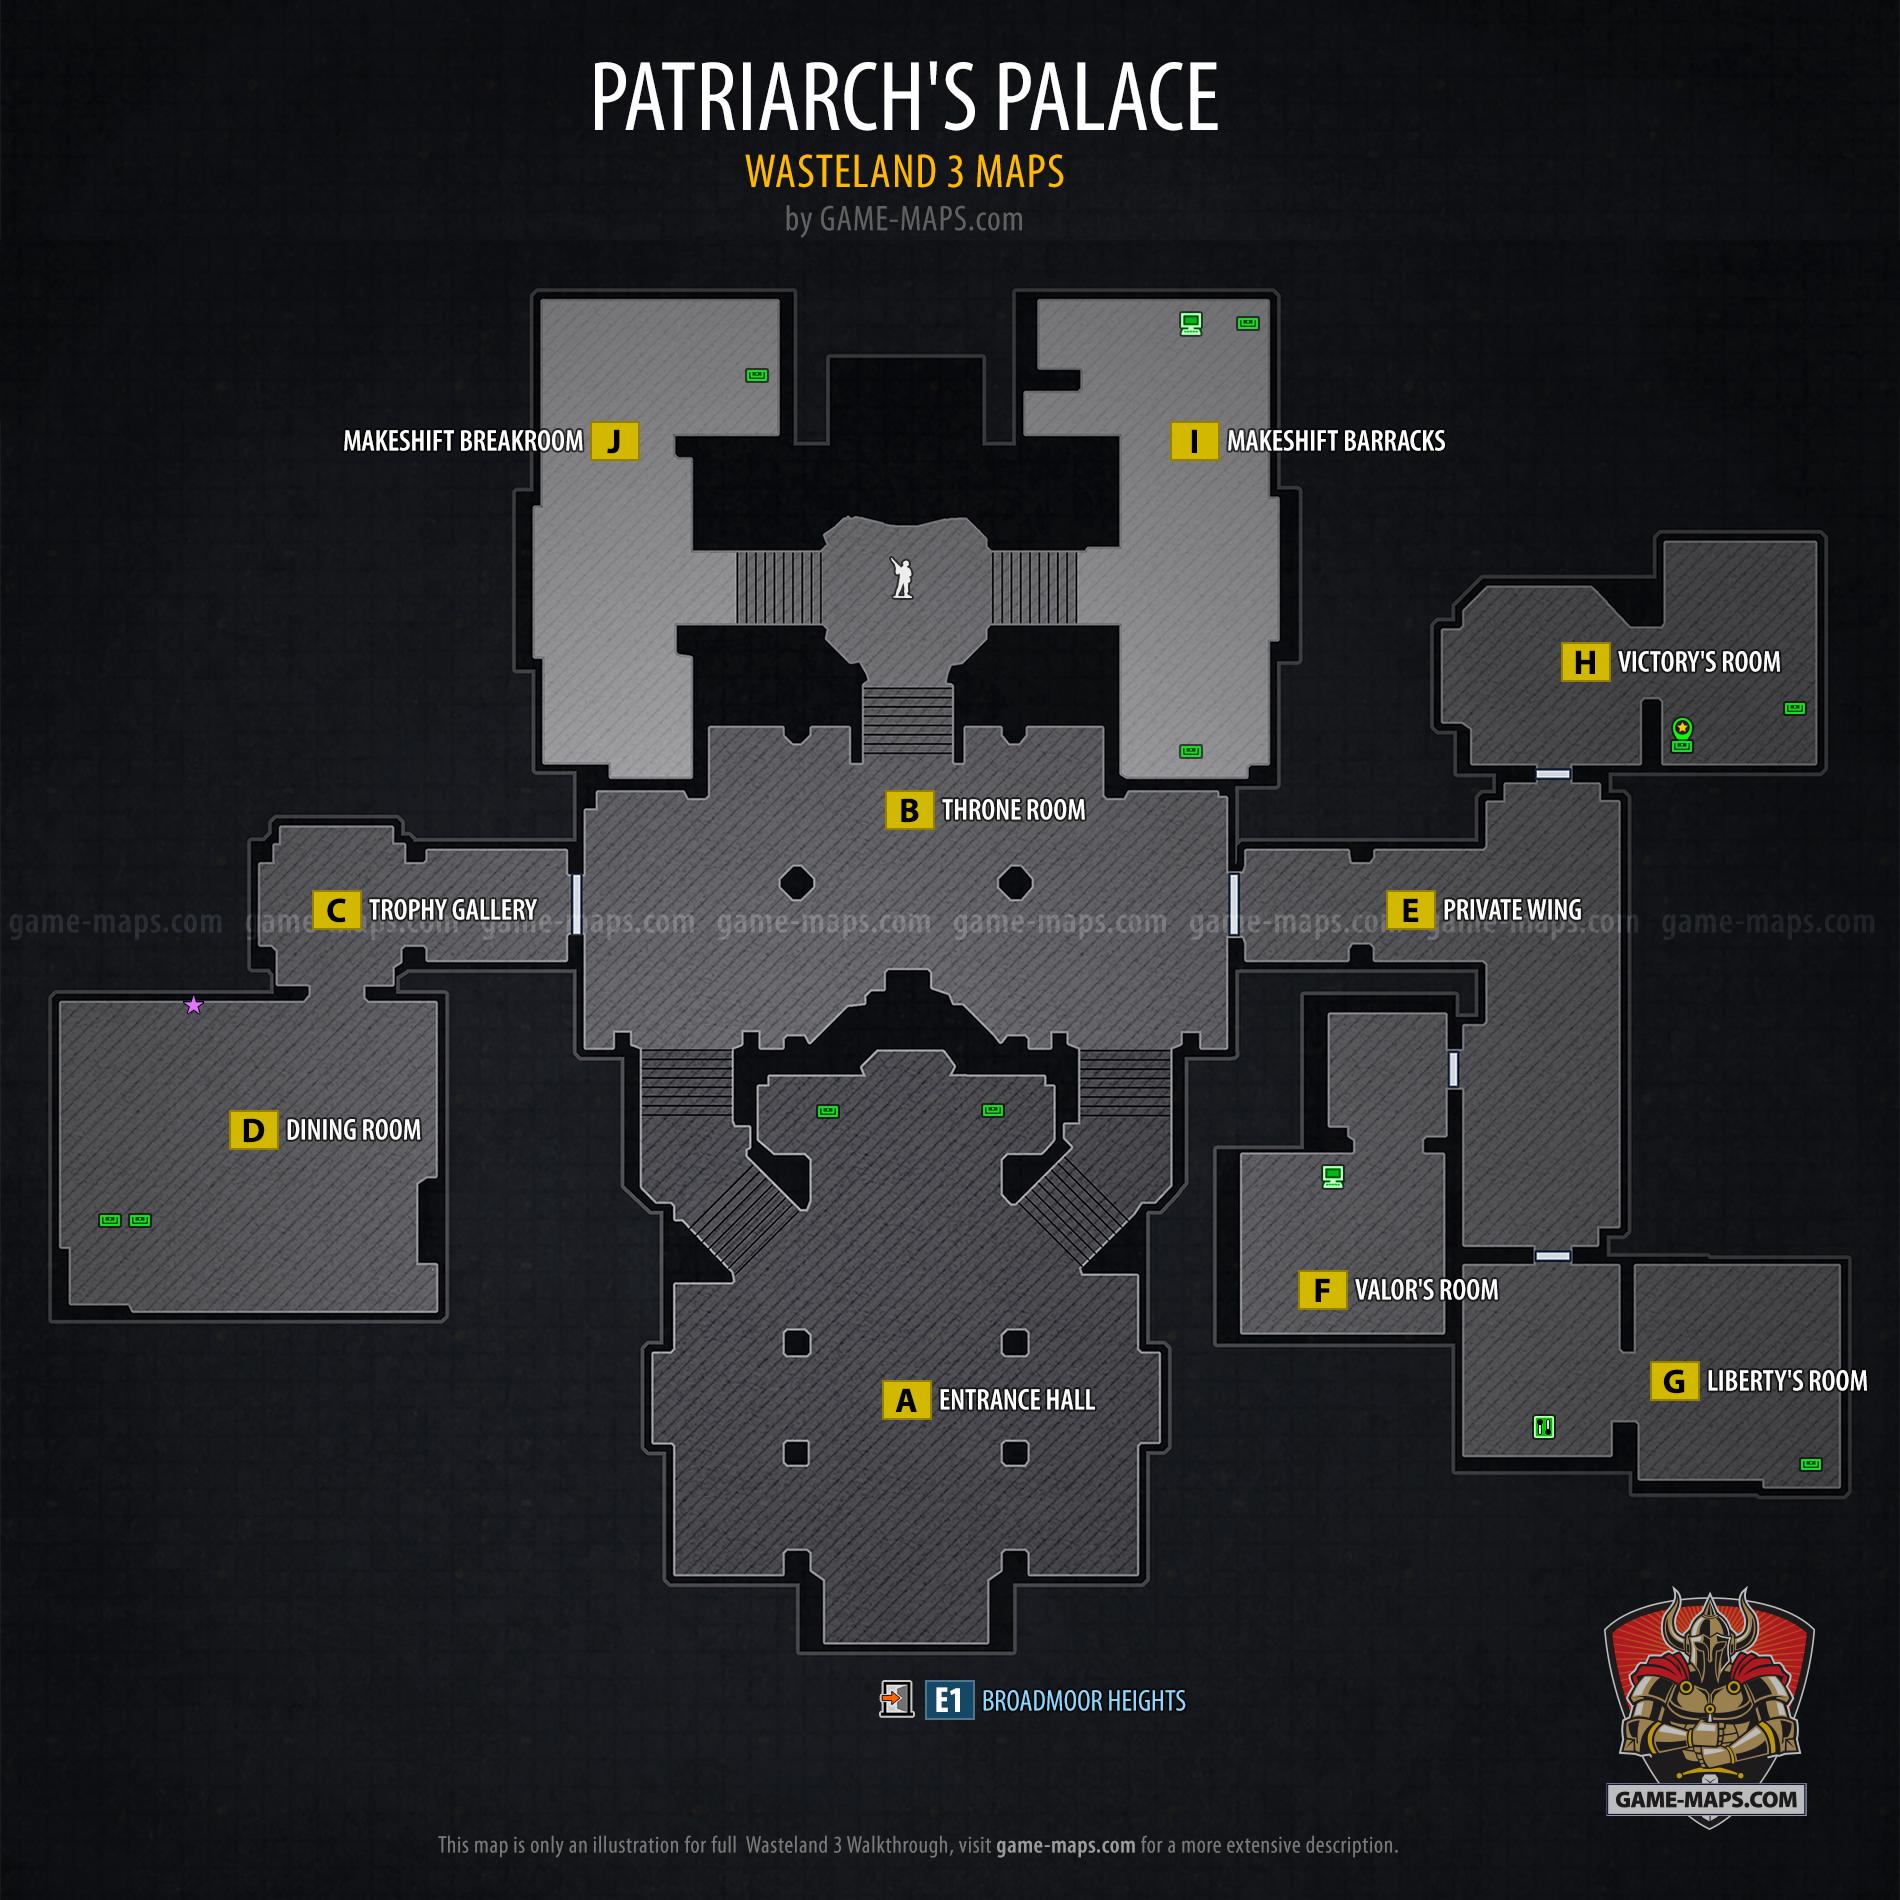 Map of Patriarch's Palace in Wasteland 3